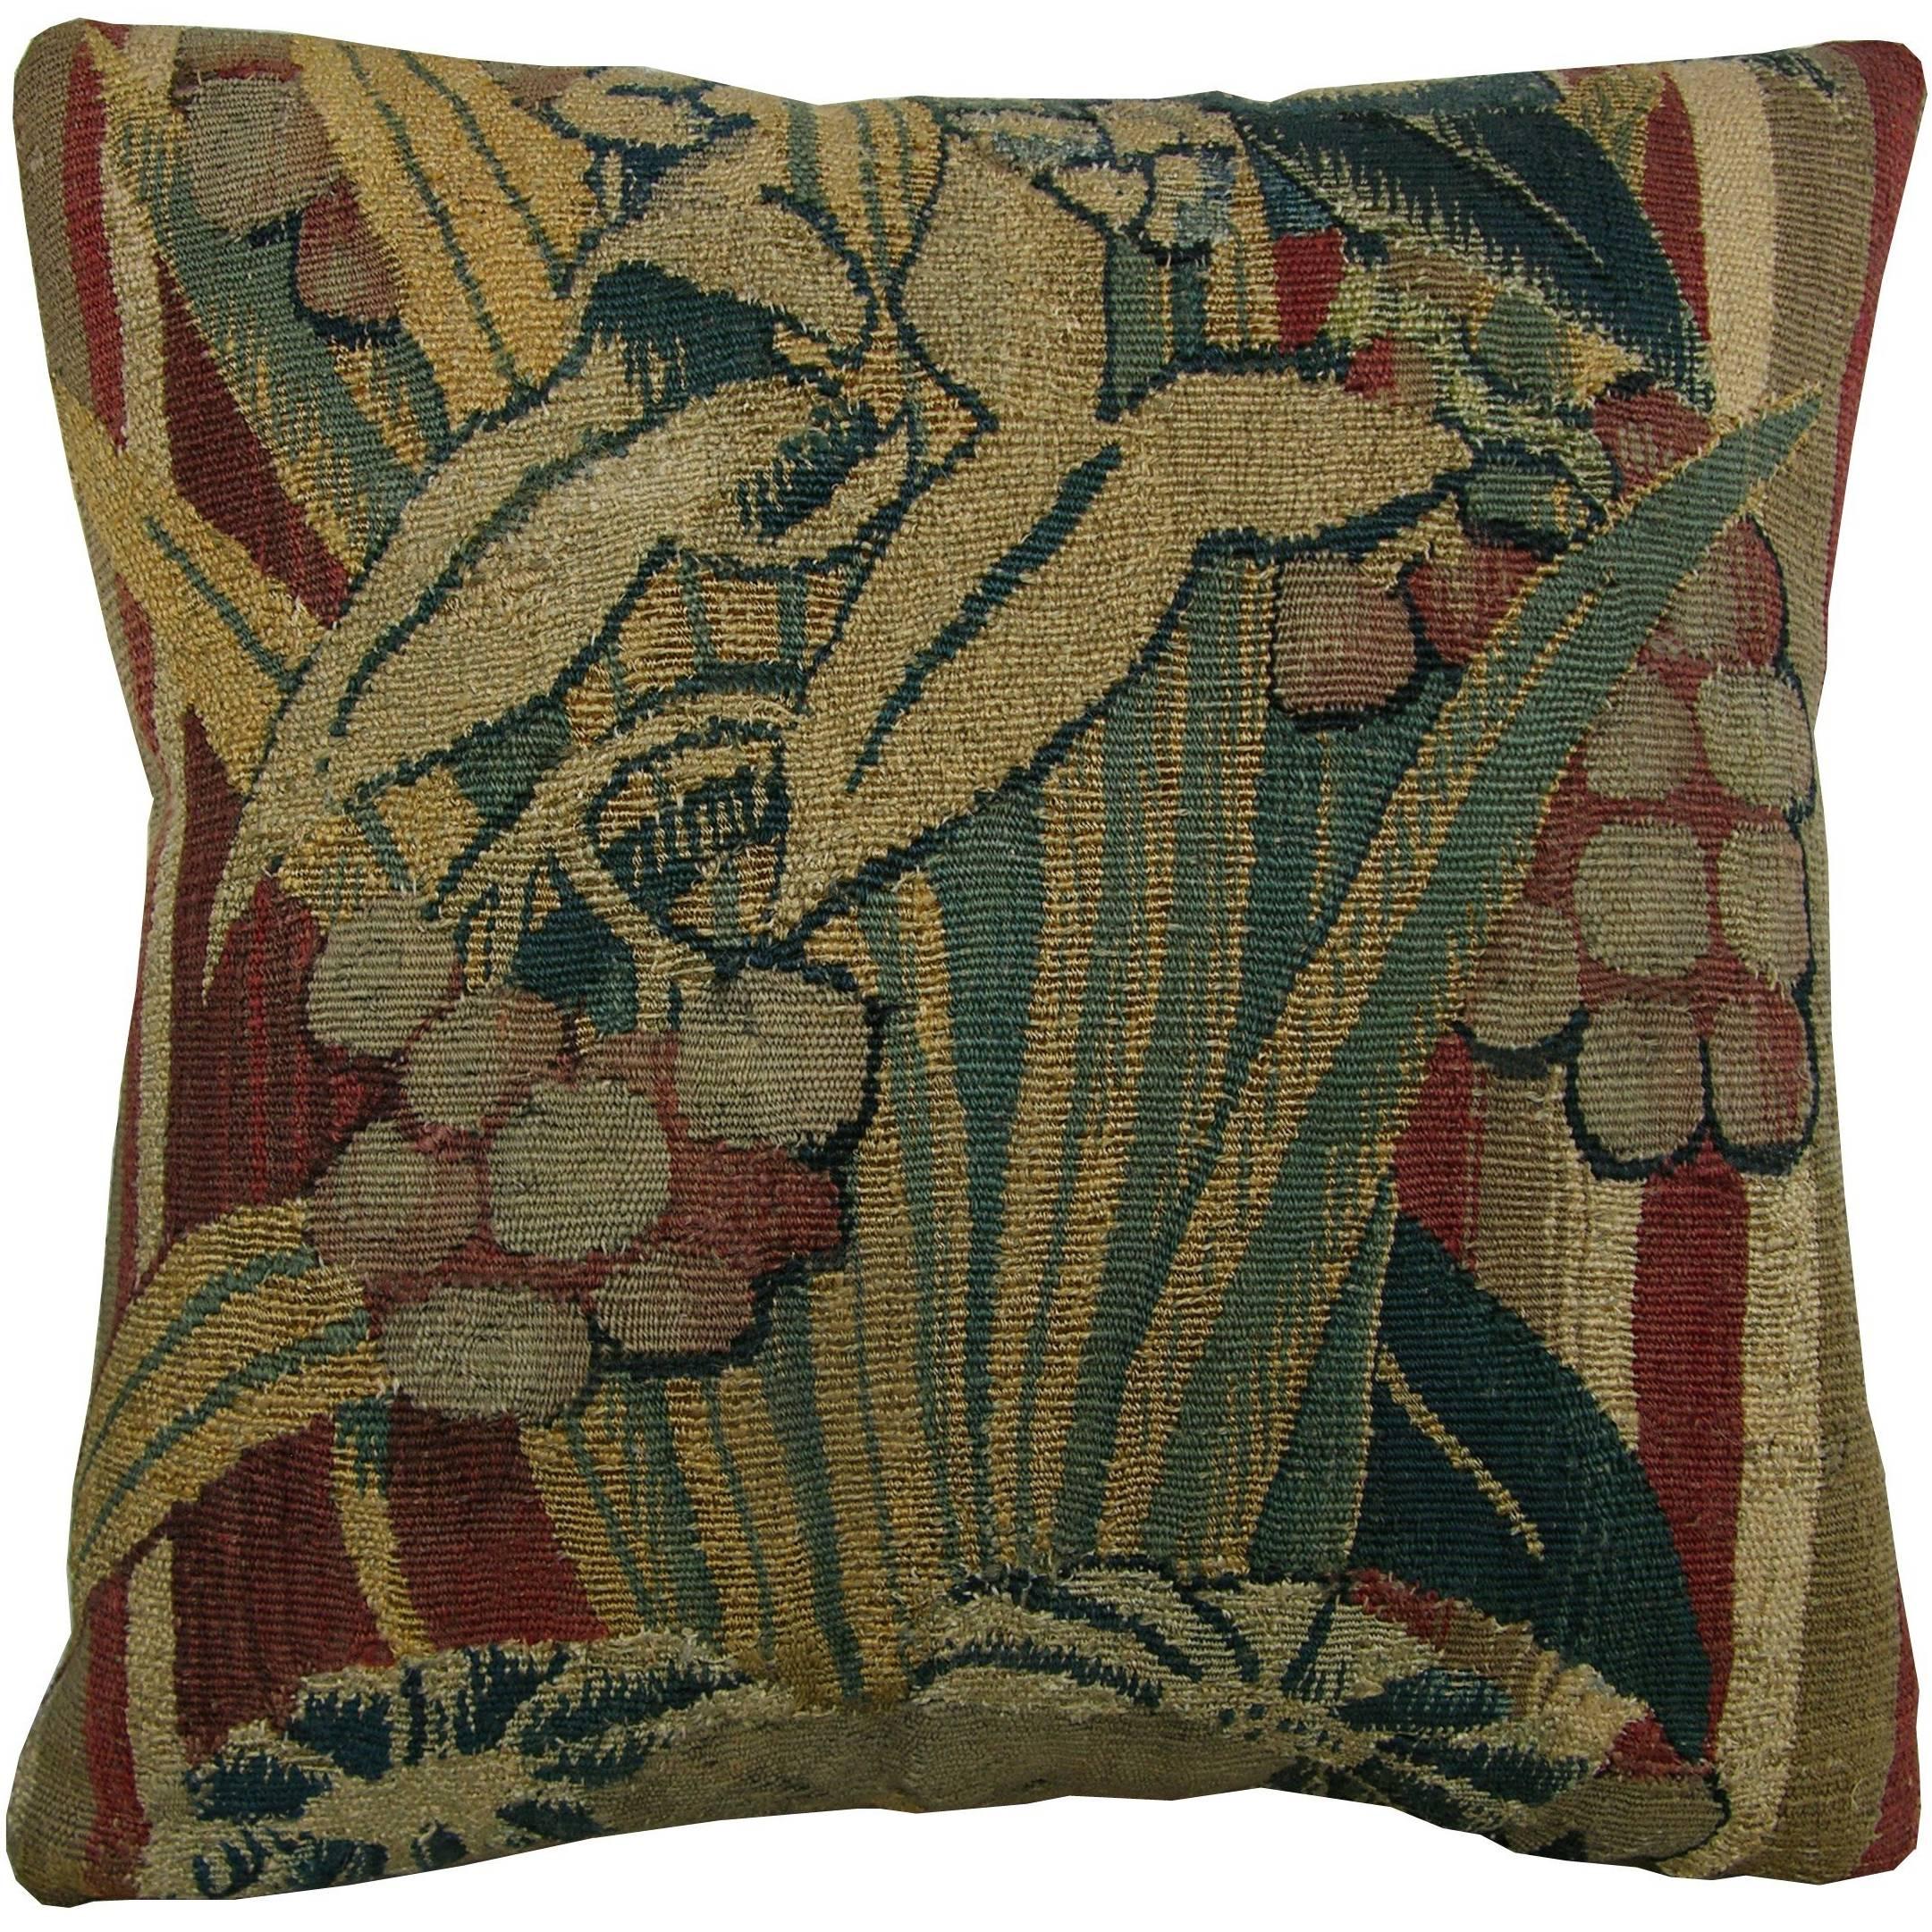 Antique Brussels Baroque Tapestry Pillow circa 16th Century 1434p